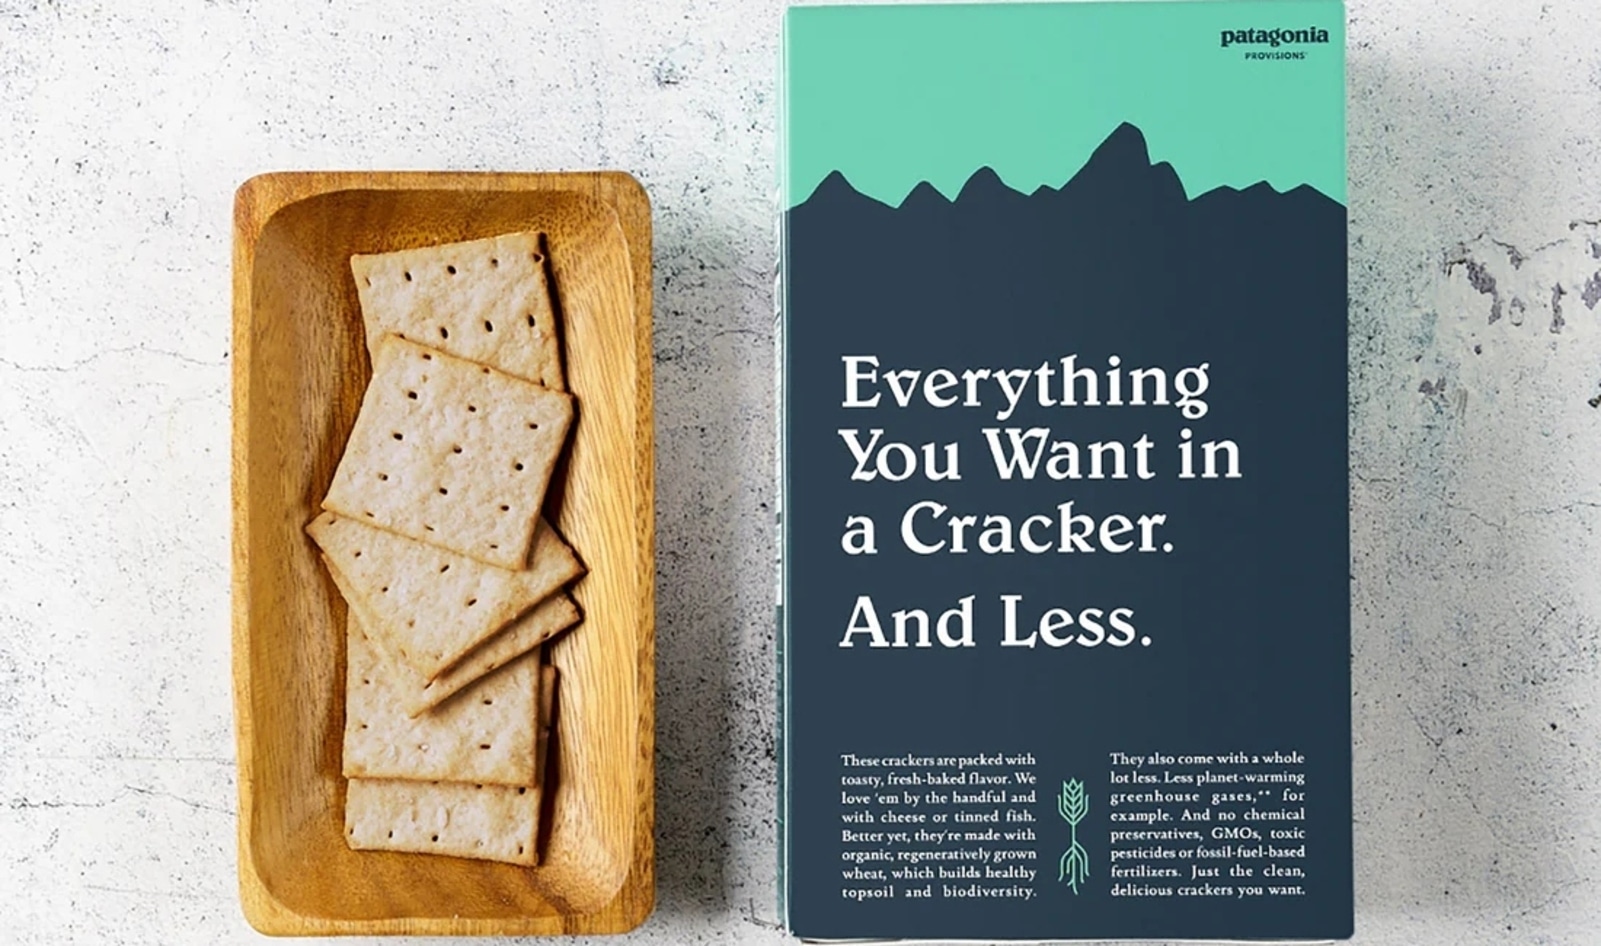 Regenerative Pasta, Crackers, and ... Seafood?  Is Patagonia Provisions Really That Sustainable?